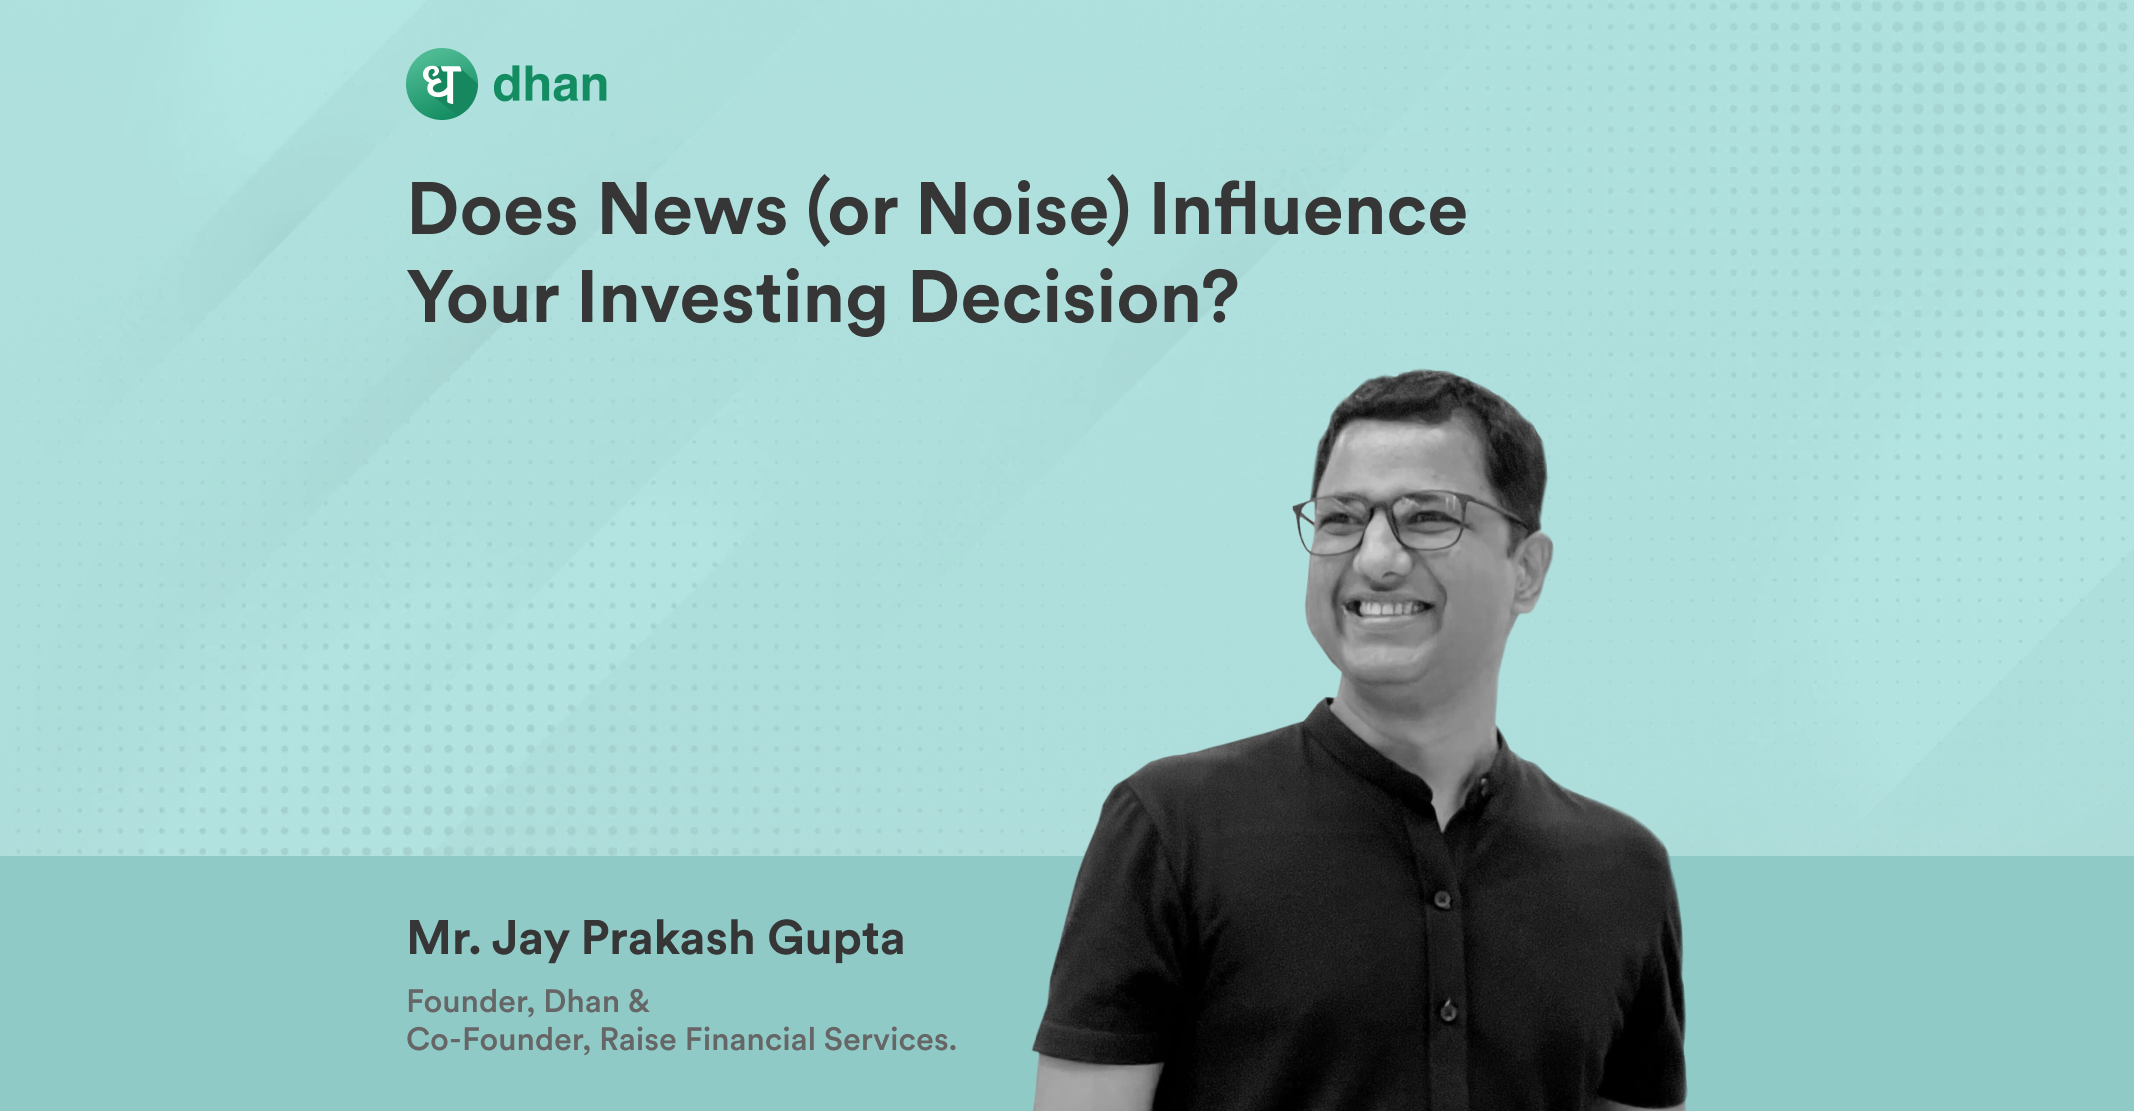 Does News (or Noise) Influence Your Investing Decision